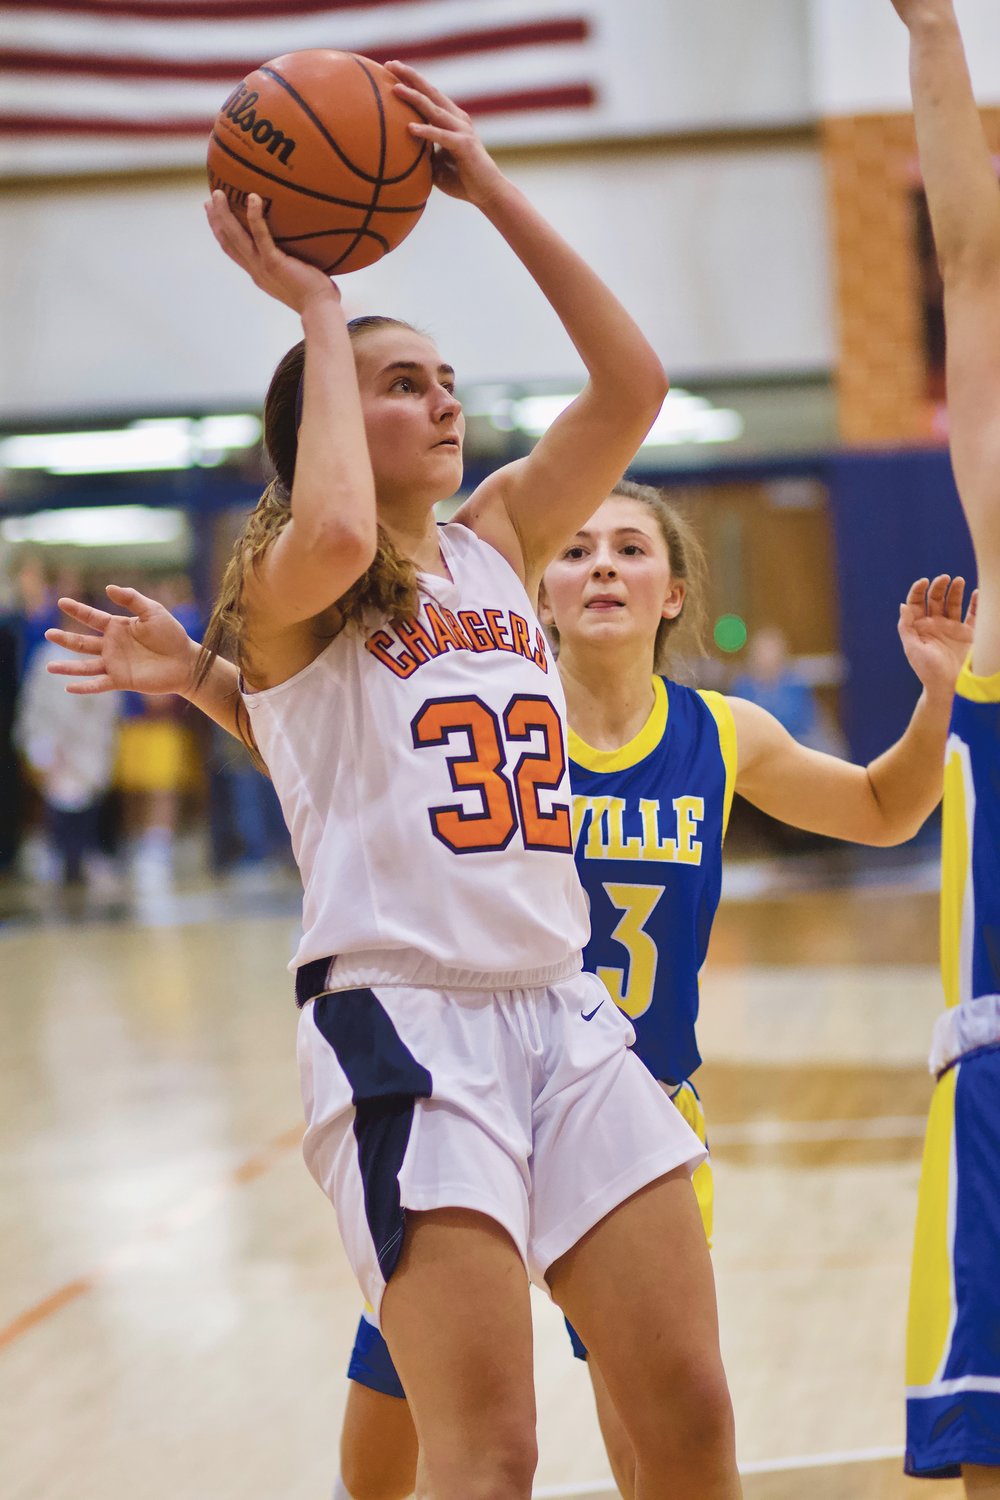 North Montgomery senior Emily Sennett returns as the Chargers top scorer from a year ago at 6.9 points per game.